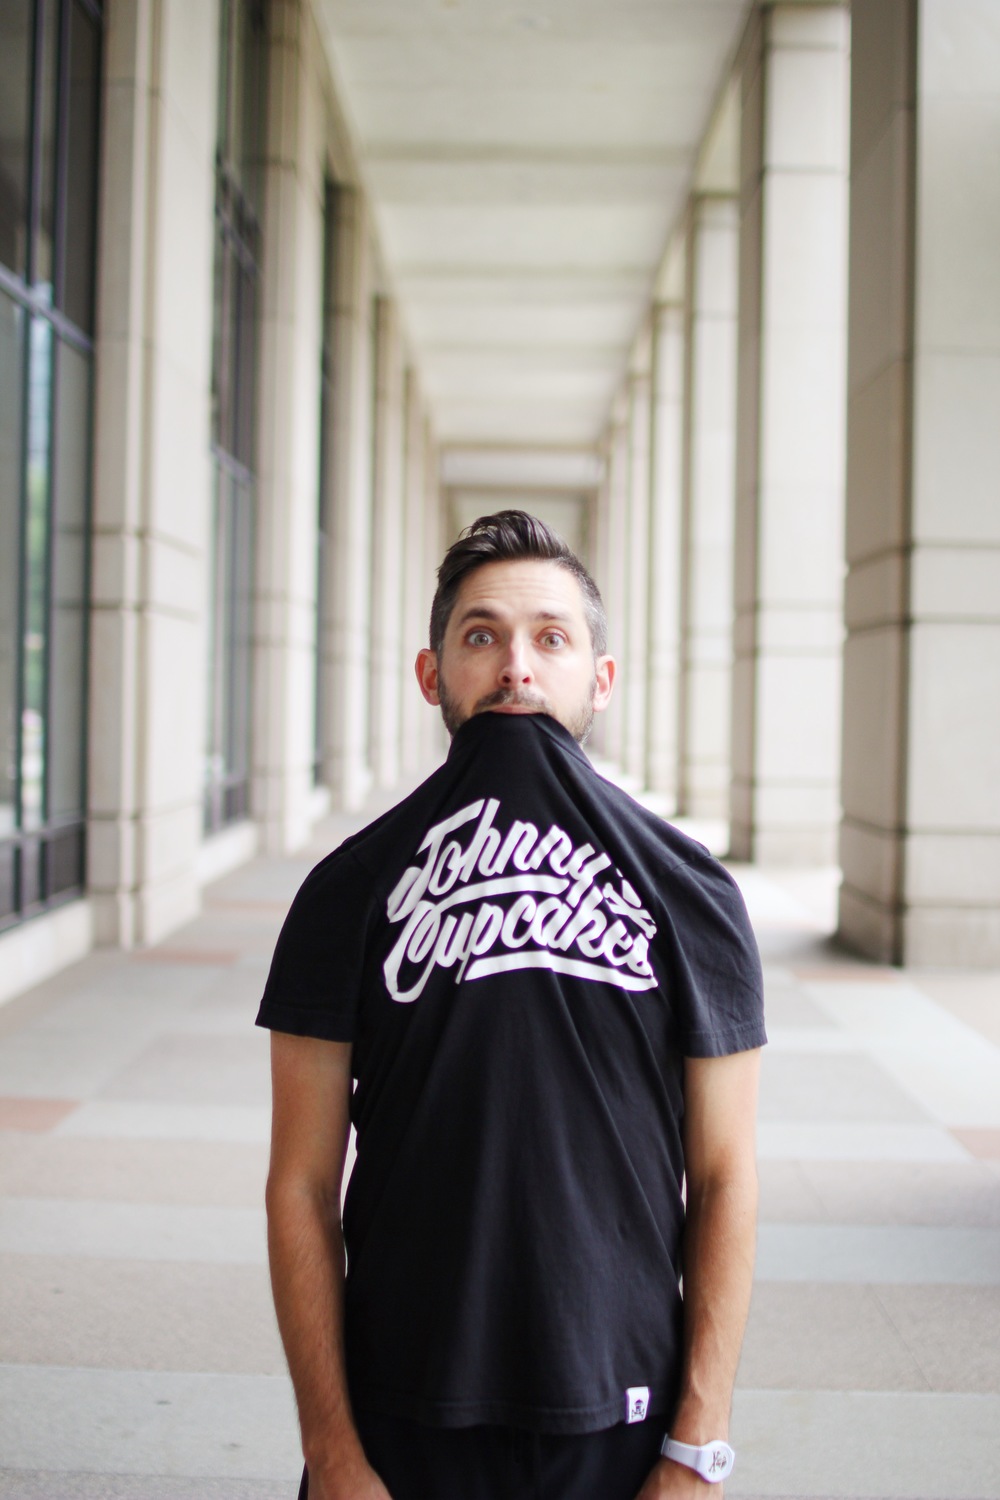 5 questions with JOHNNY CUPCAKES — Unique Markets